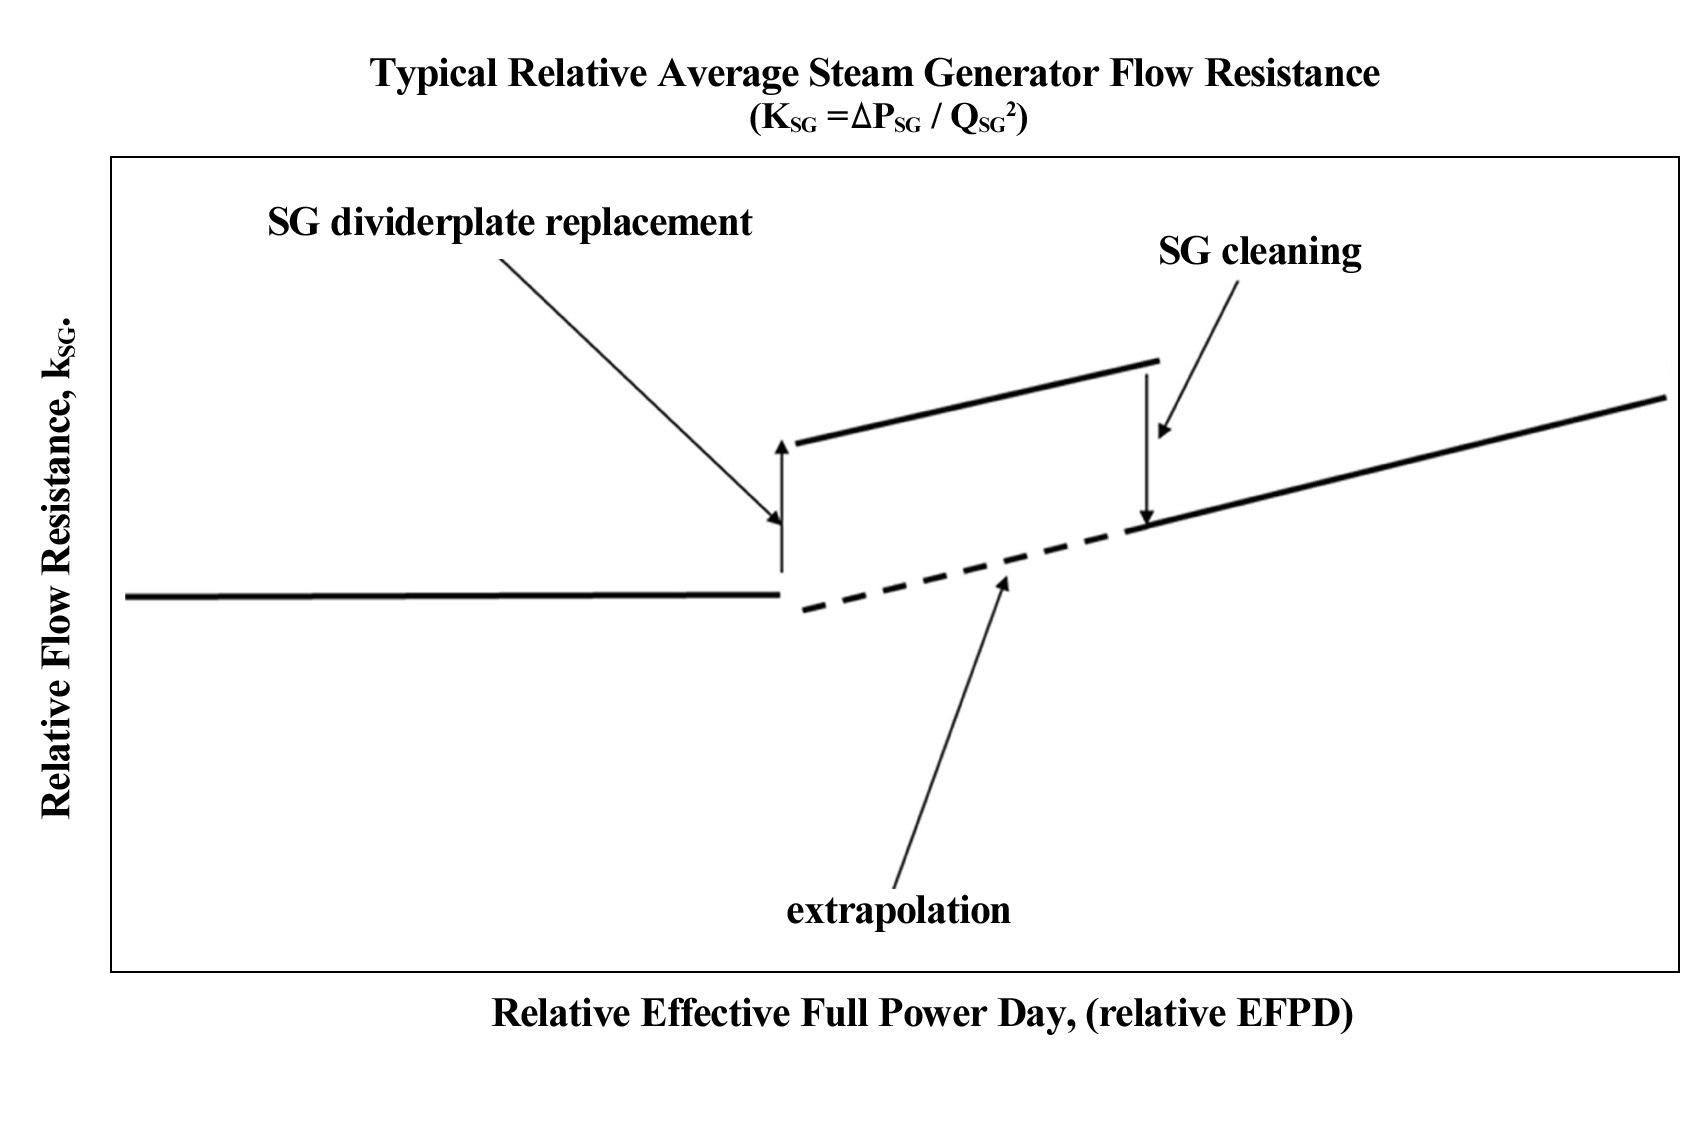 Typical Relative Average Steam Generator Flow Resistance of a CANDU Plant